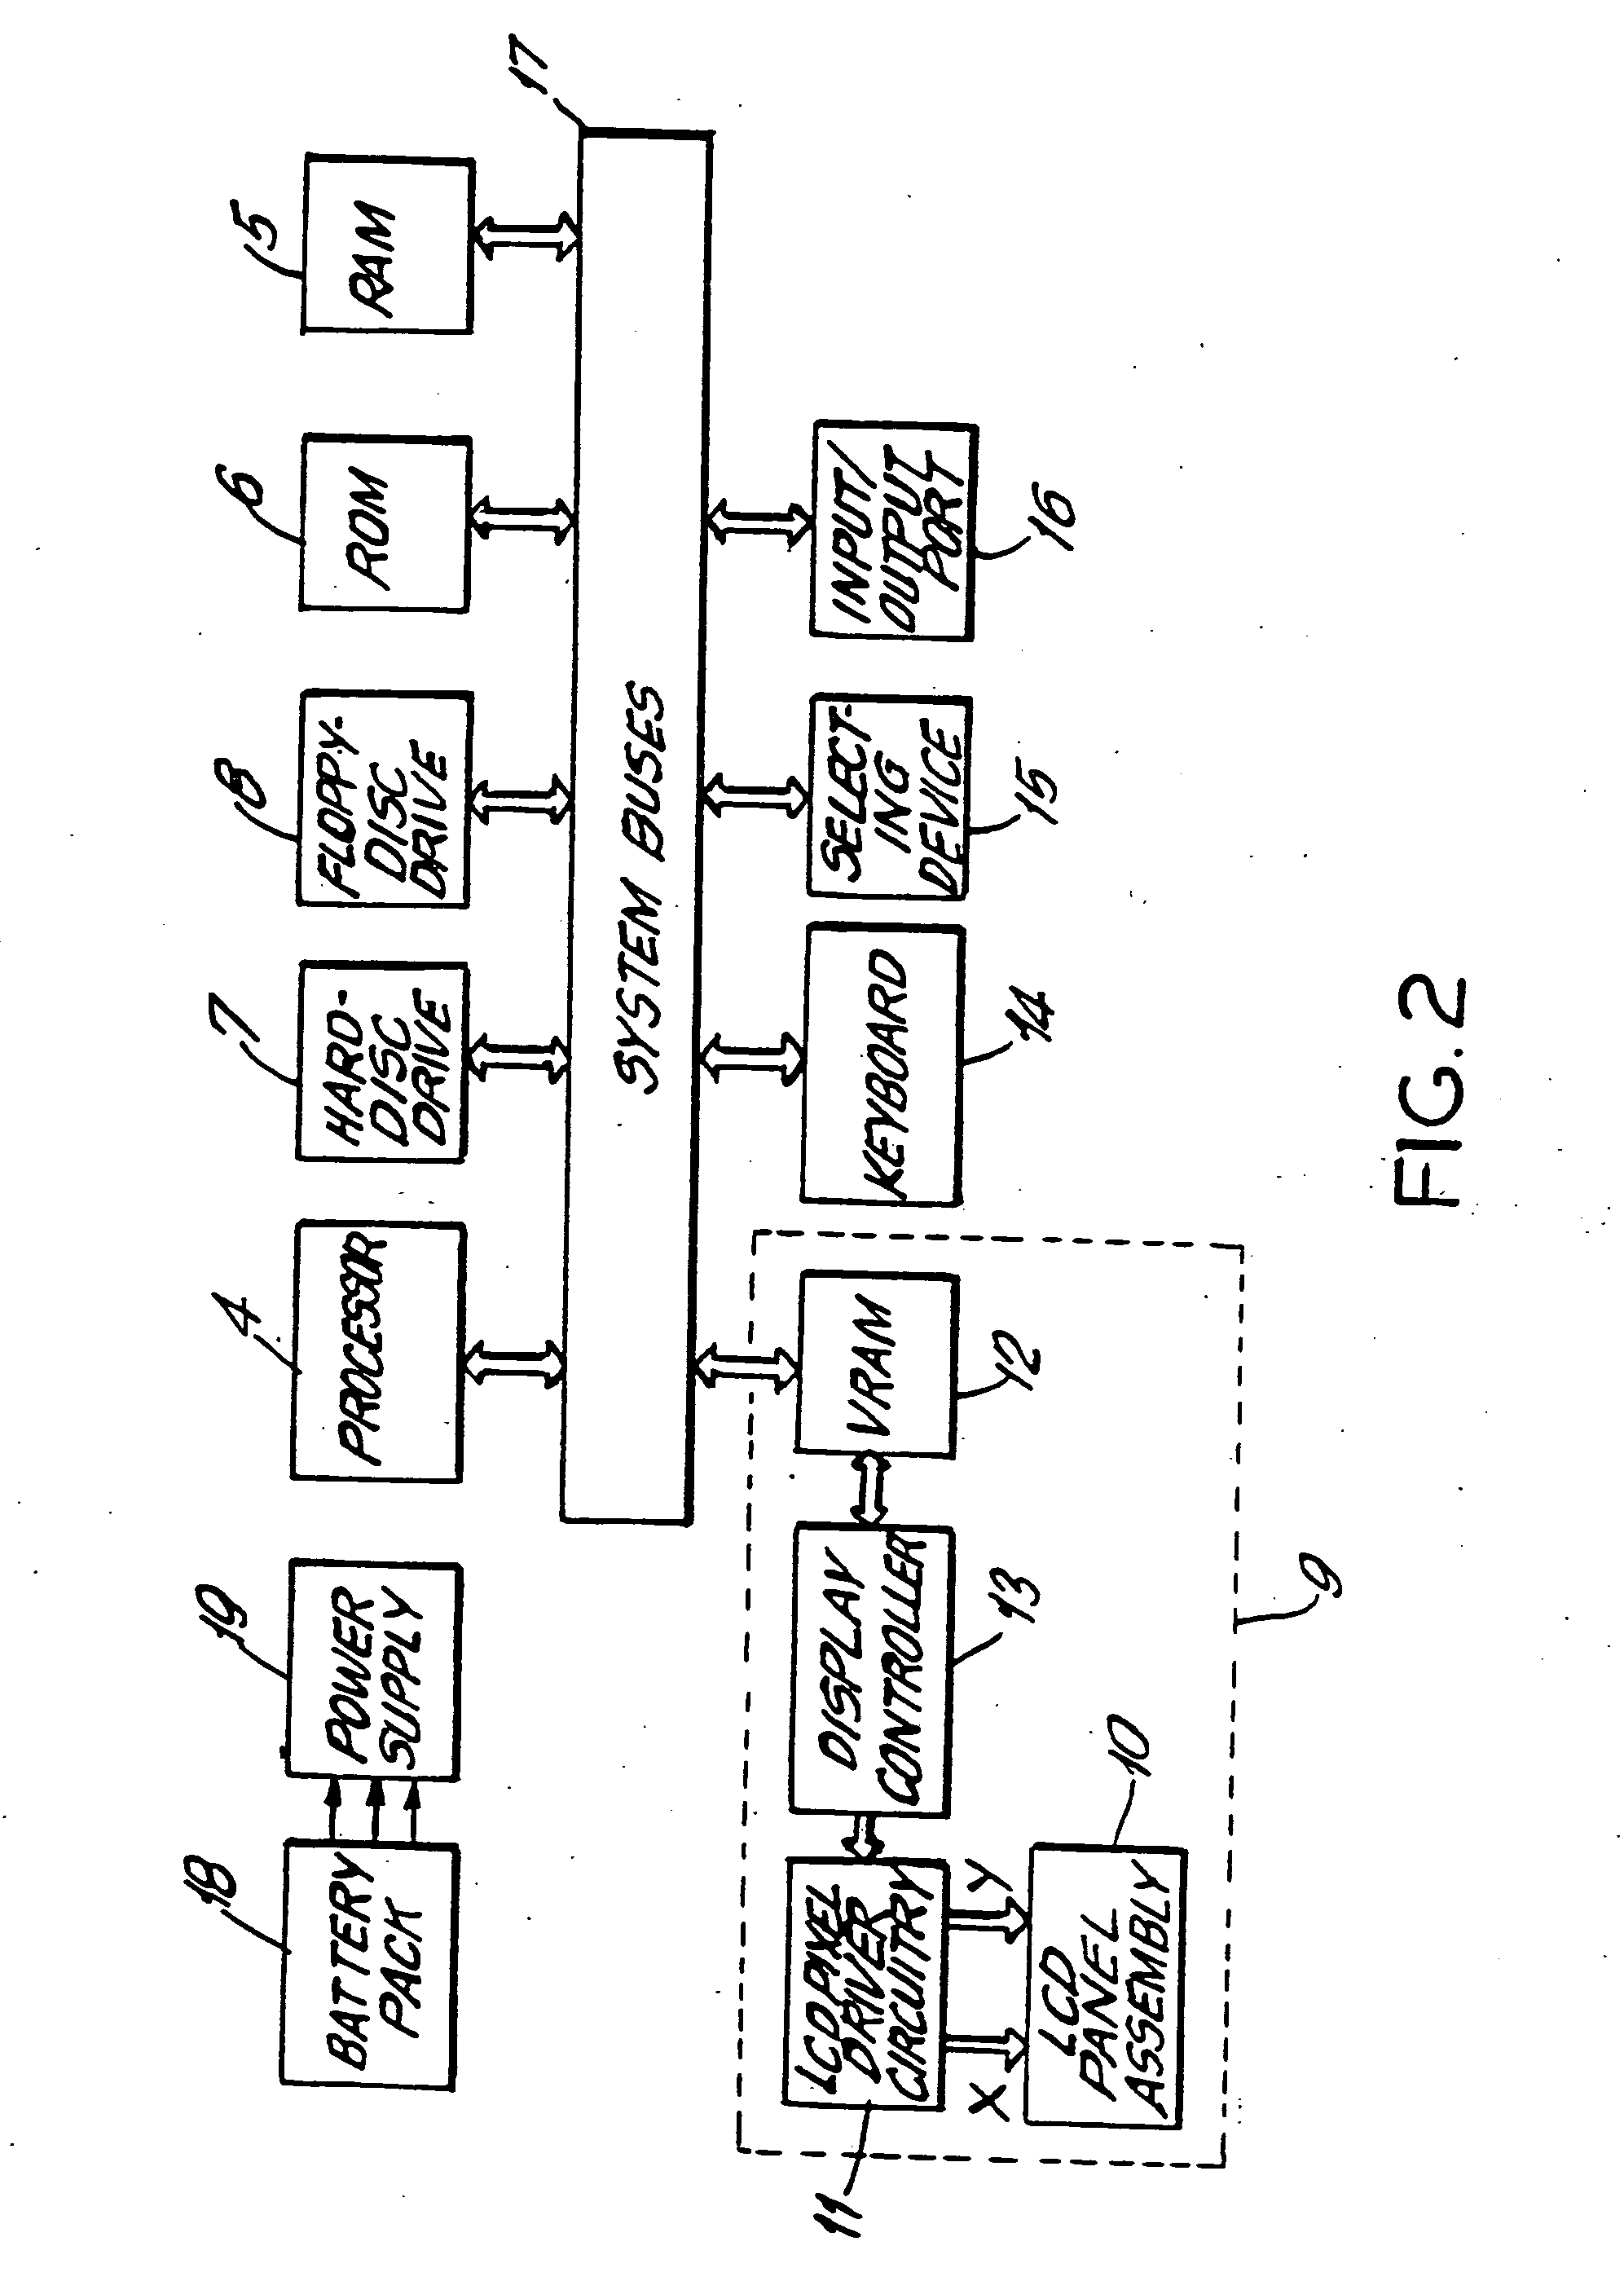 Backlighting construction for use in computer-based display systems having direct and projection viewing modes of operation